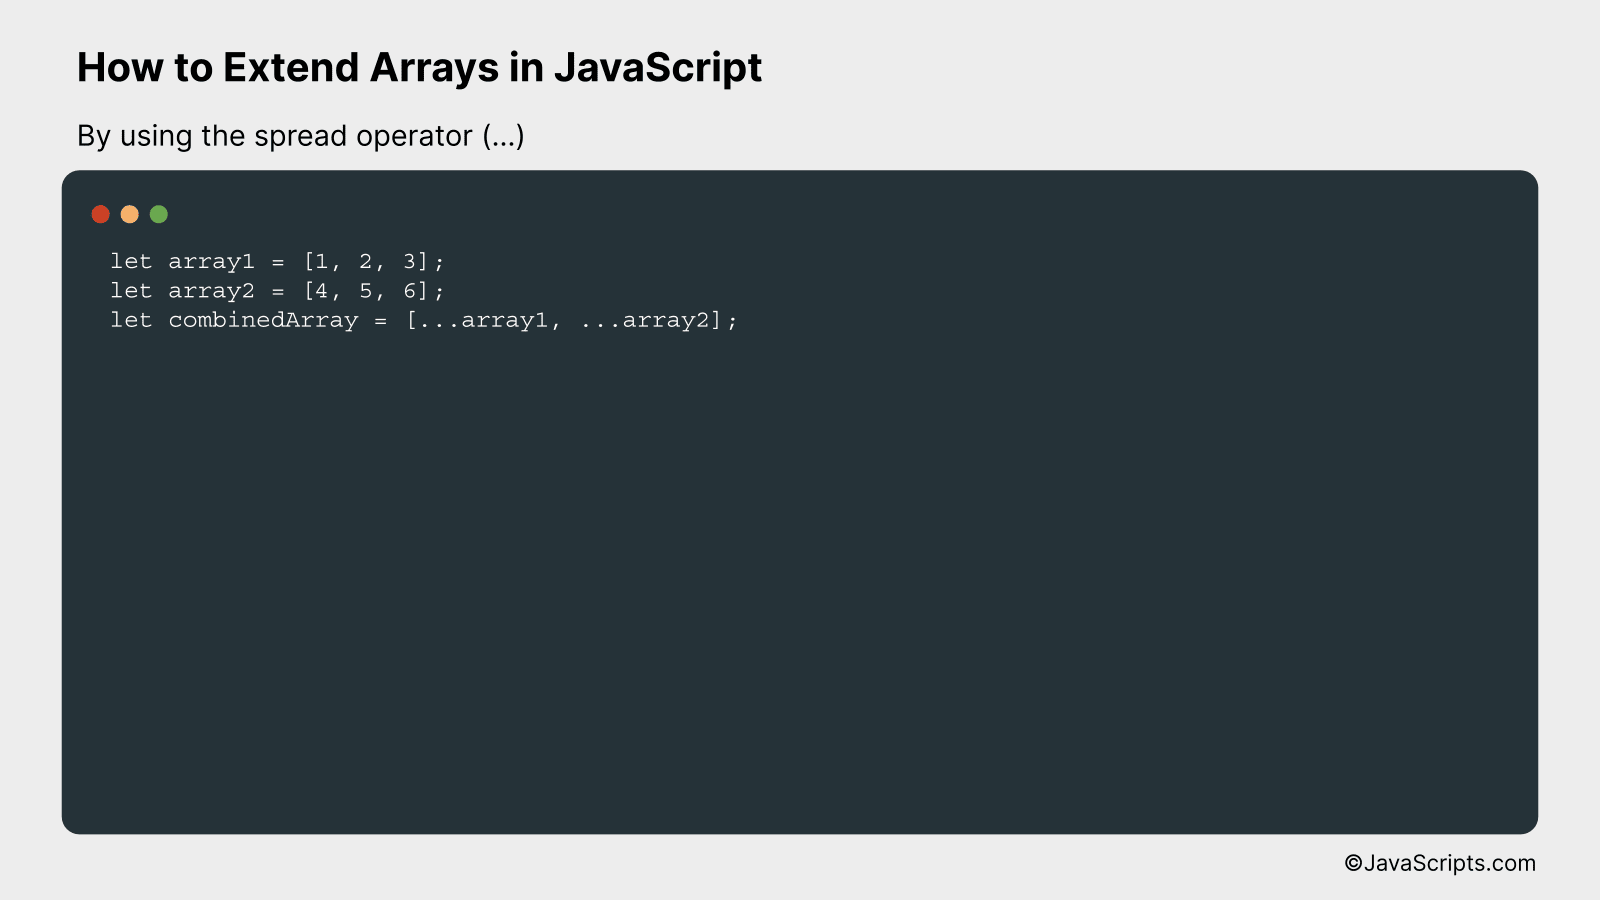 By using the spread operator (...)